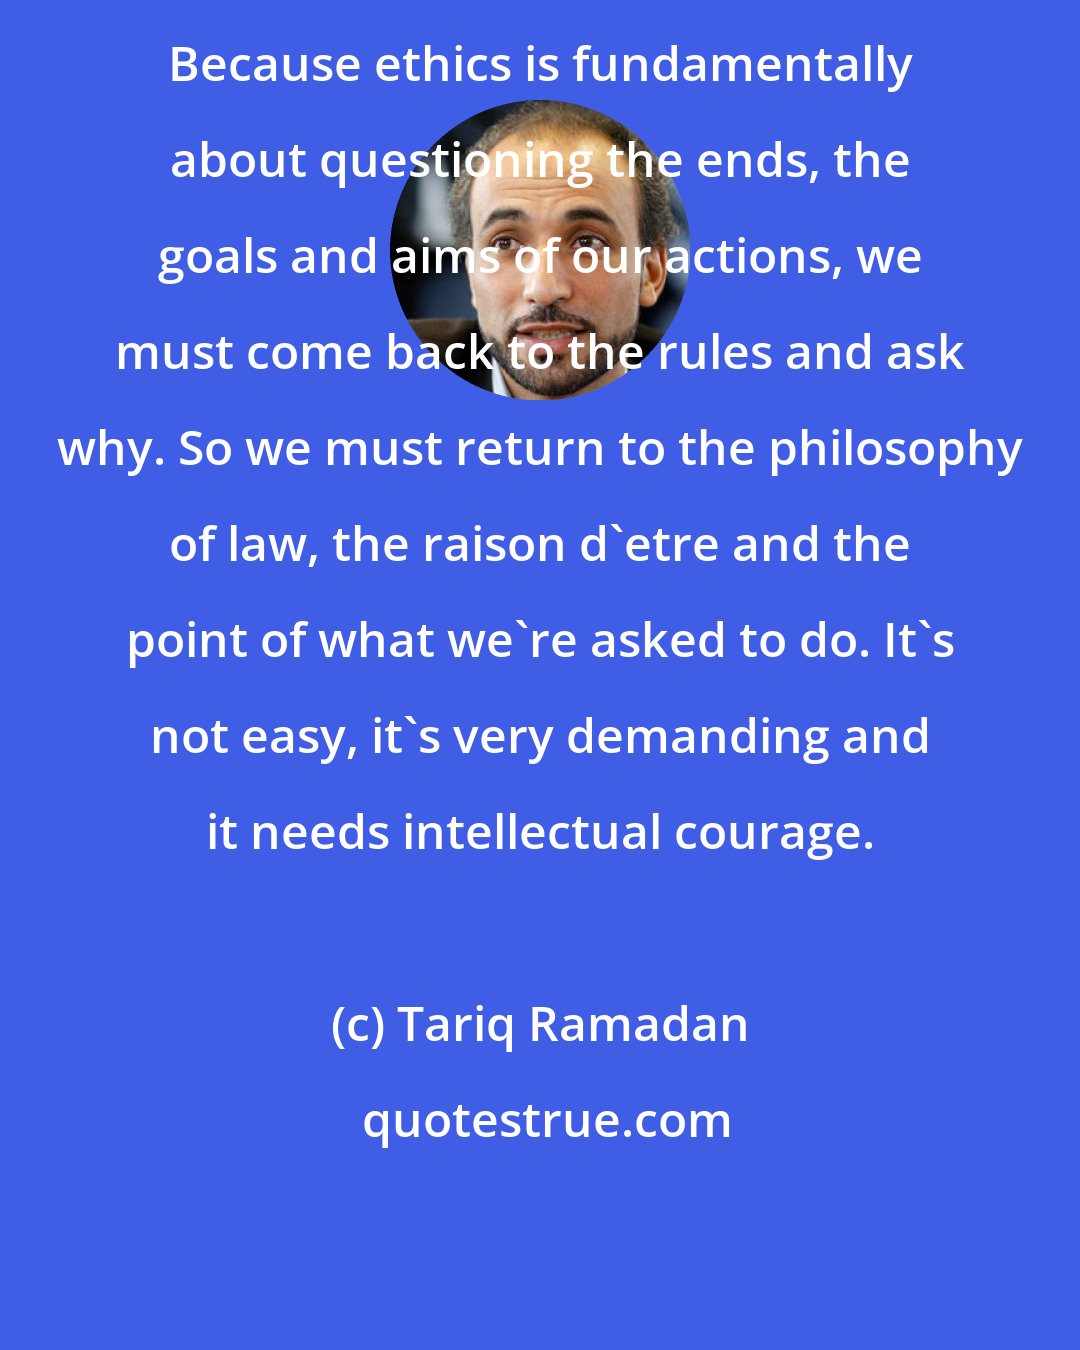 Tariq Ramadan: Because ethics is fundamentally about questioning the ends, the goals and aims of our actions, we must come back to the rules and ask why. So we must return to the philosophy of law, the raison d'etre and the point of what we're asked to do. It's not easy, it's very demanding and it needs intellectual courage.